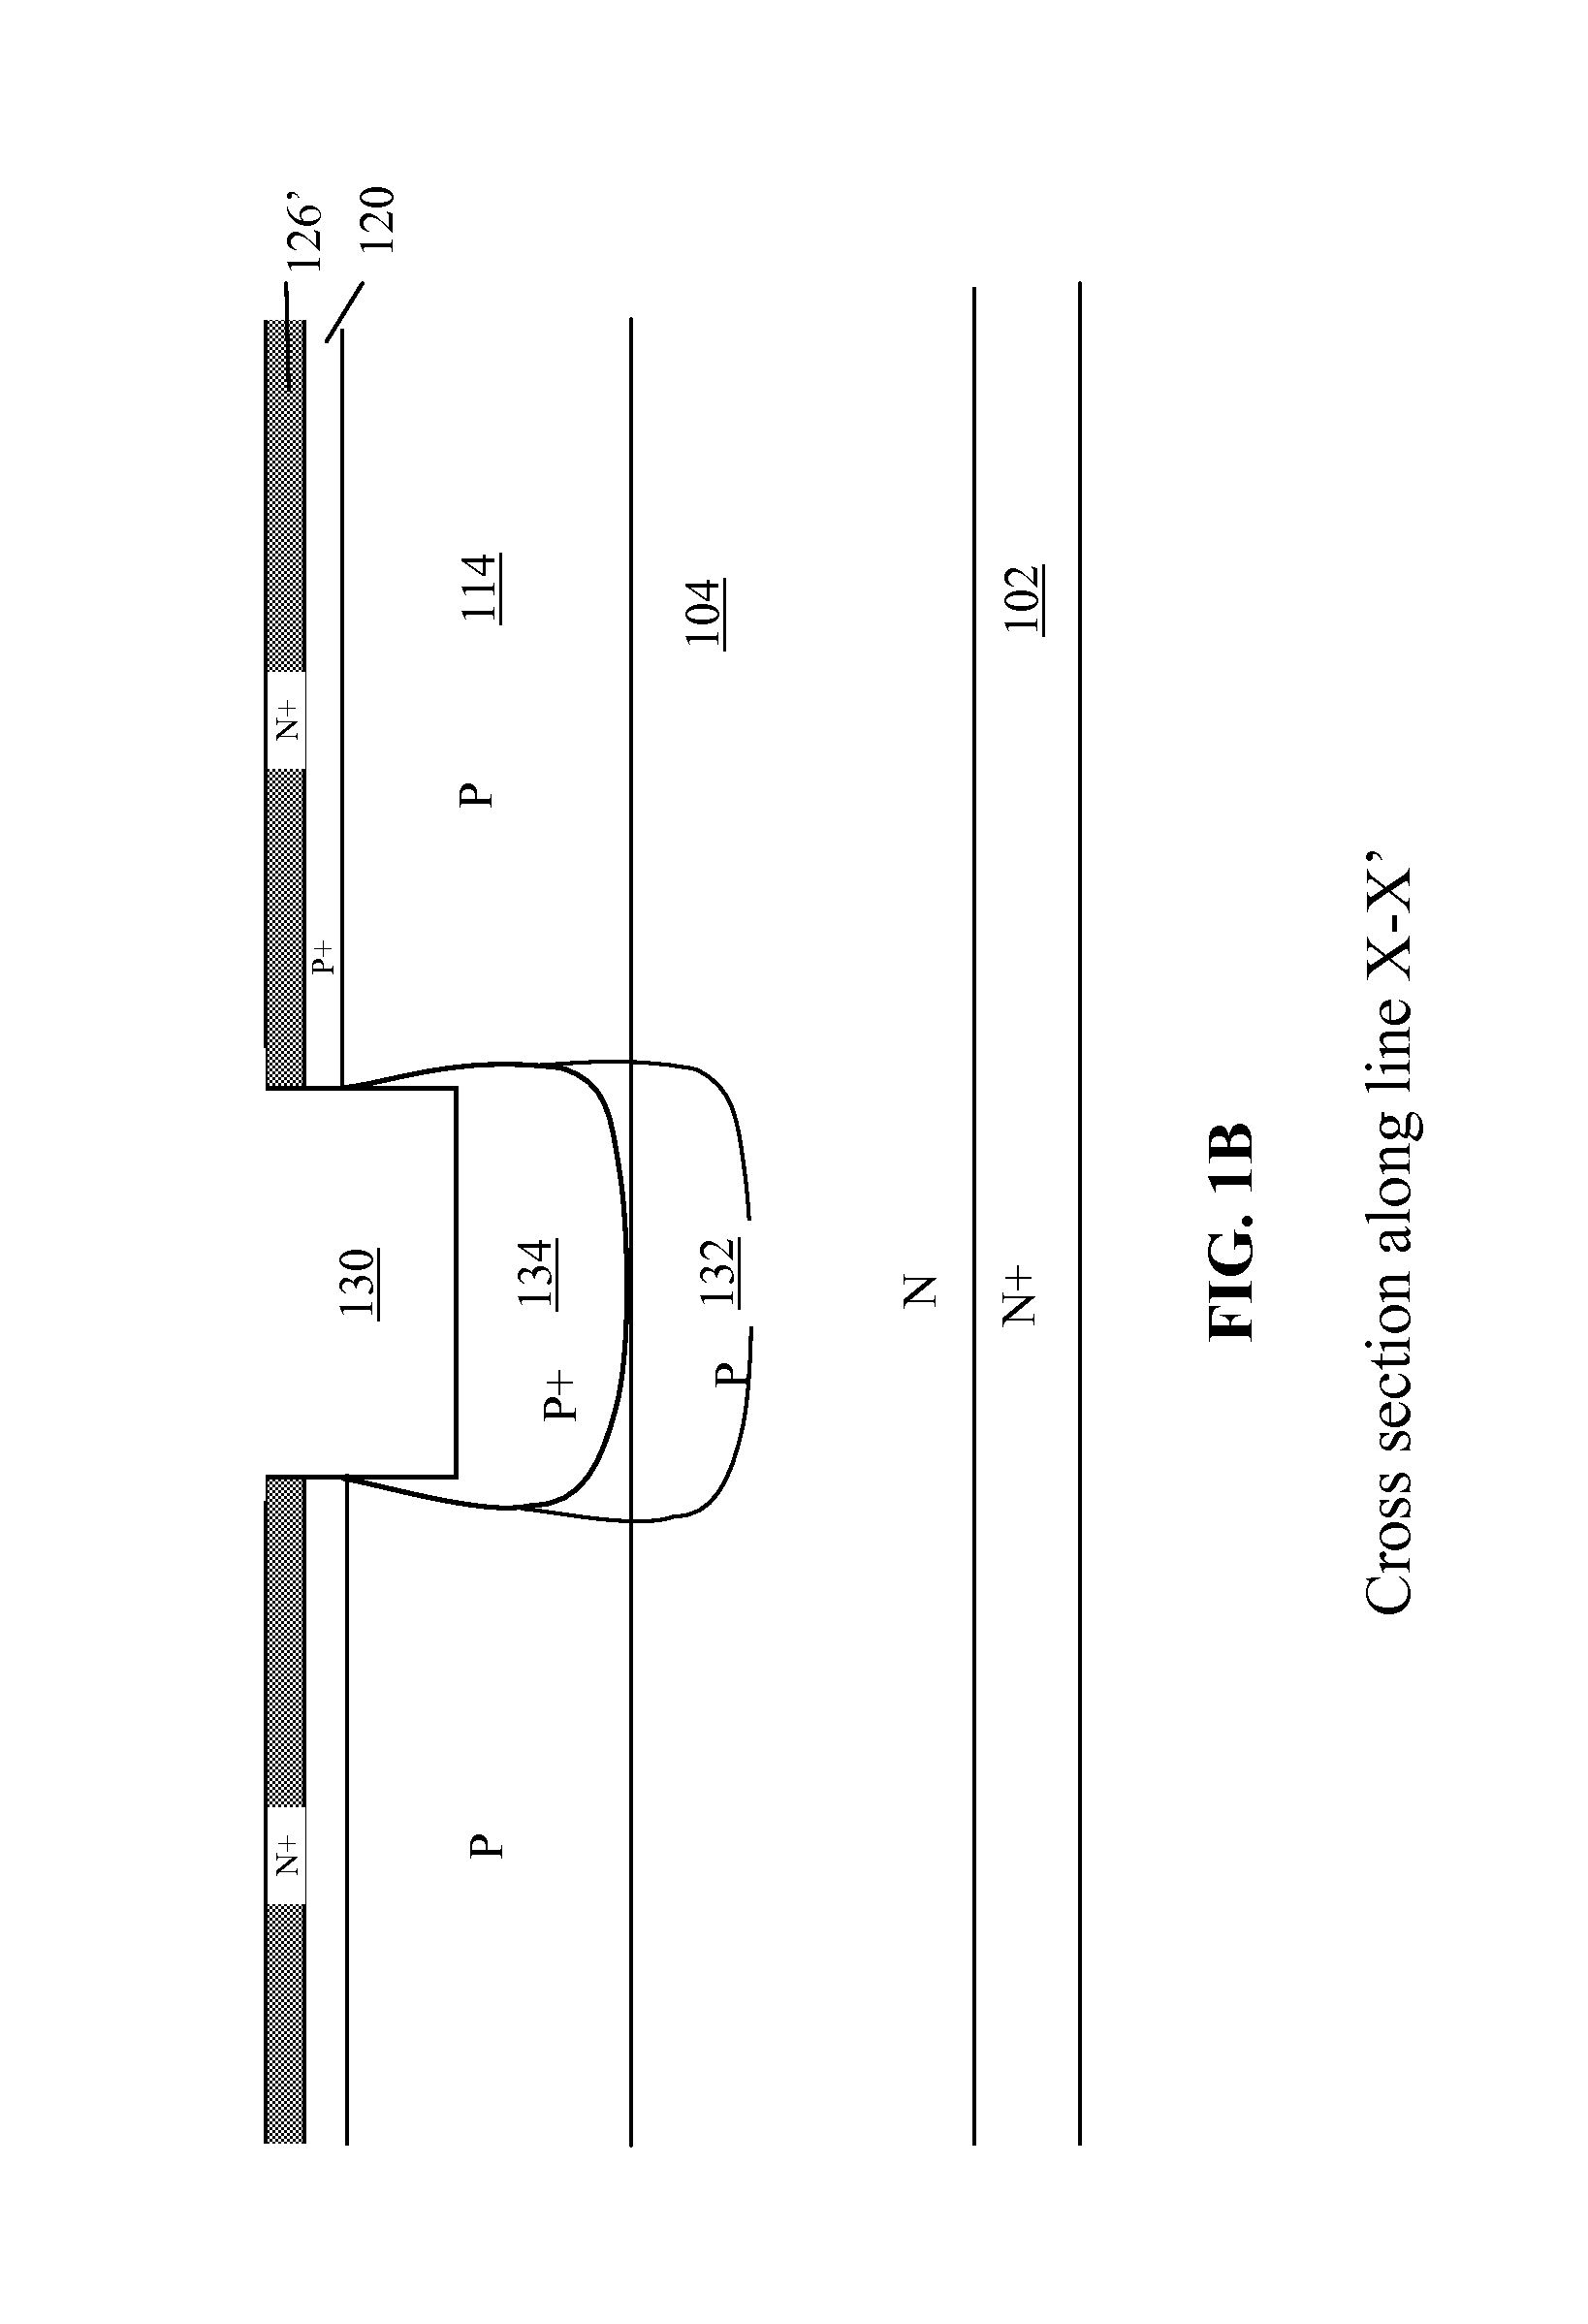 Nano mosfet with trench bottom oxide shielded and third dimensional p-body contact